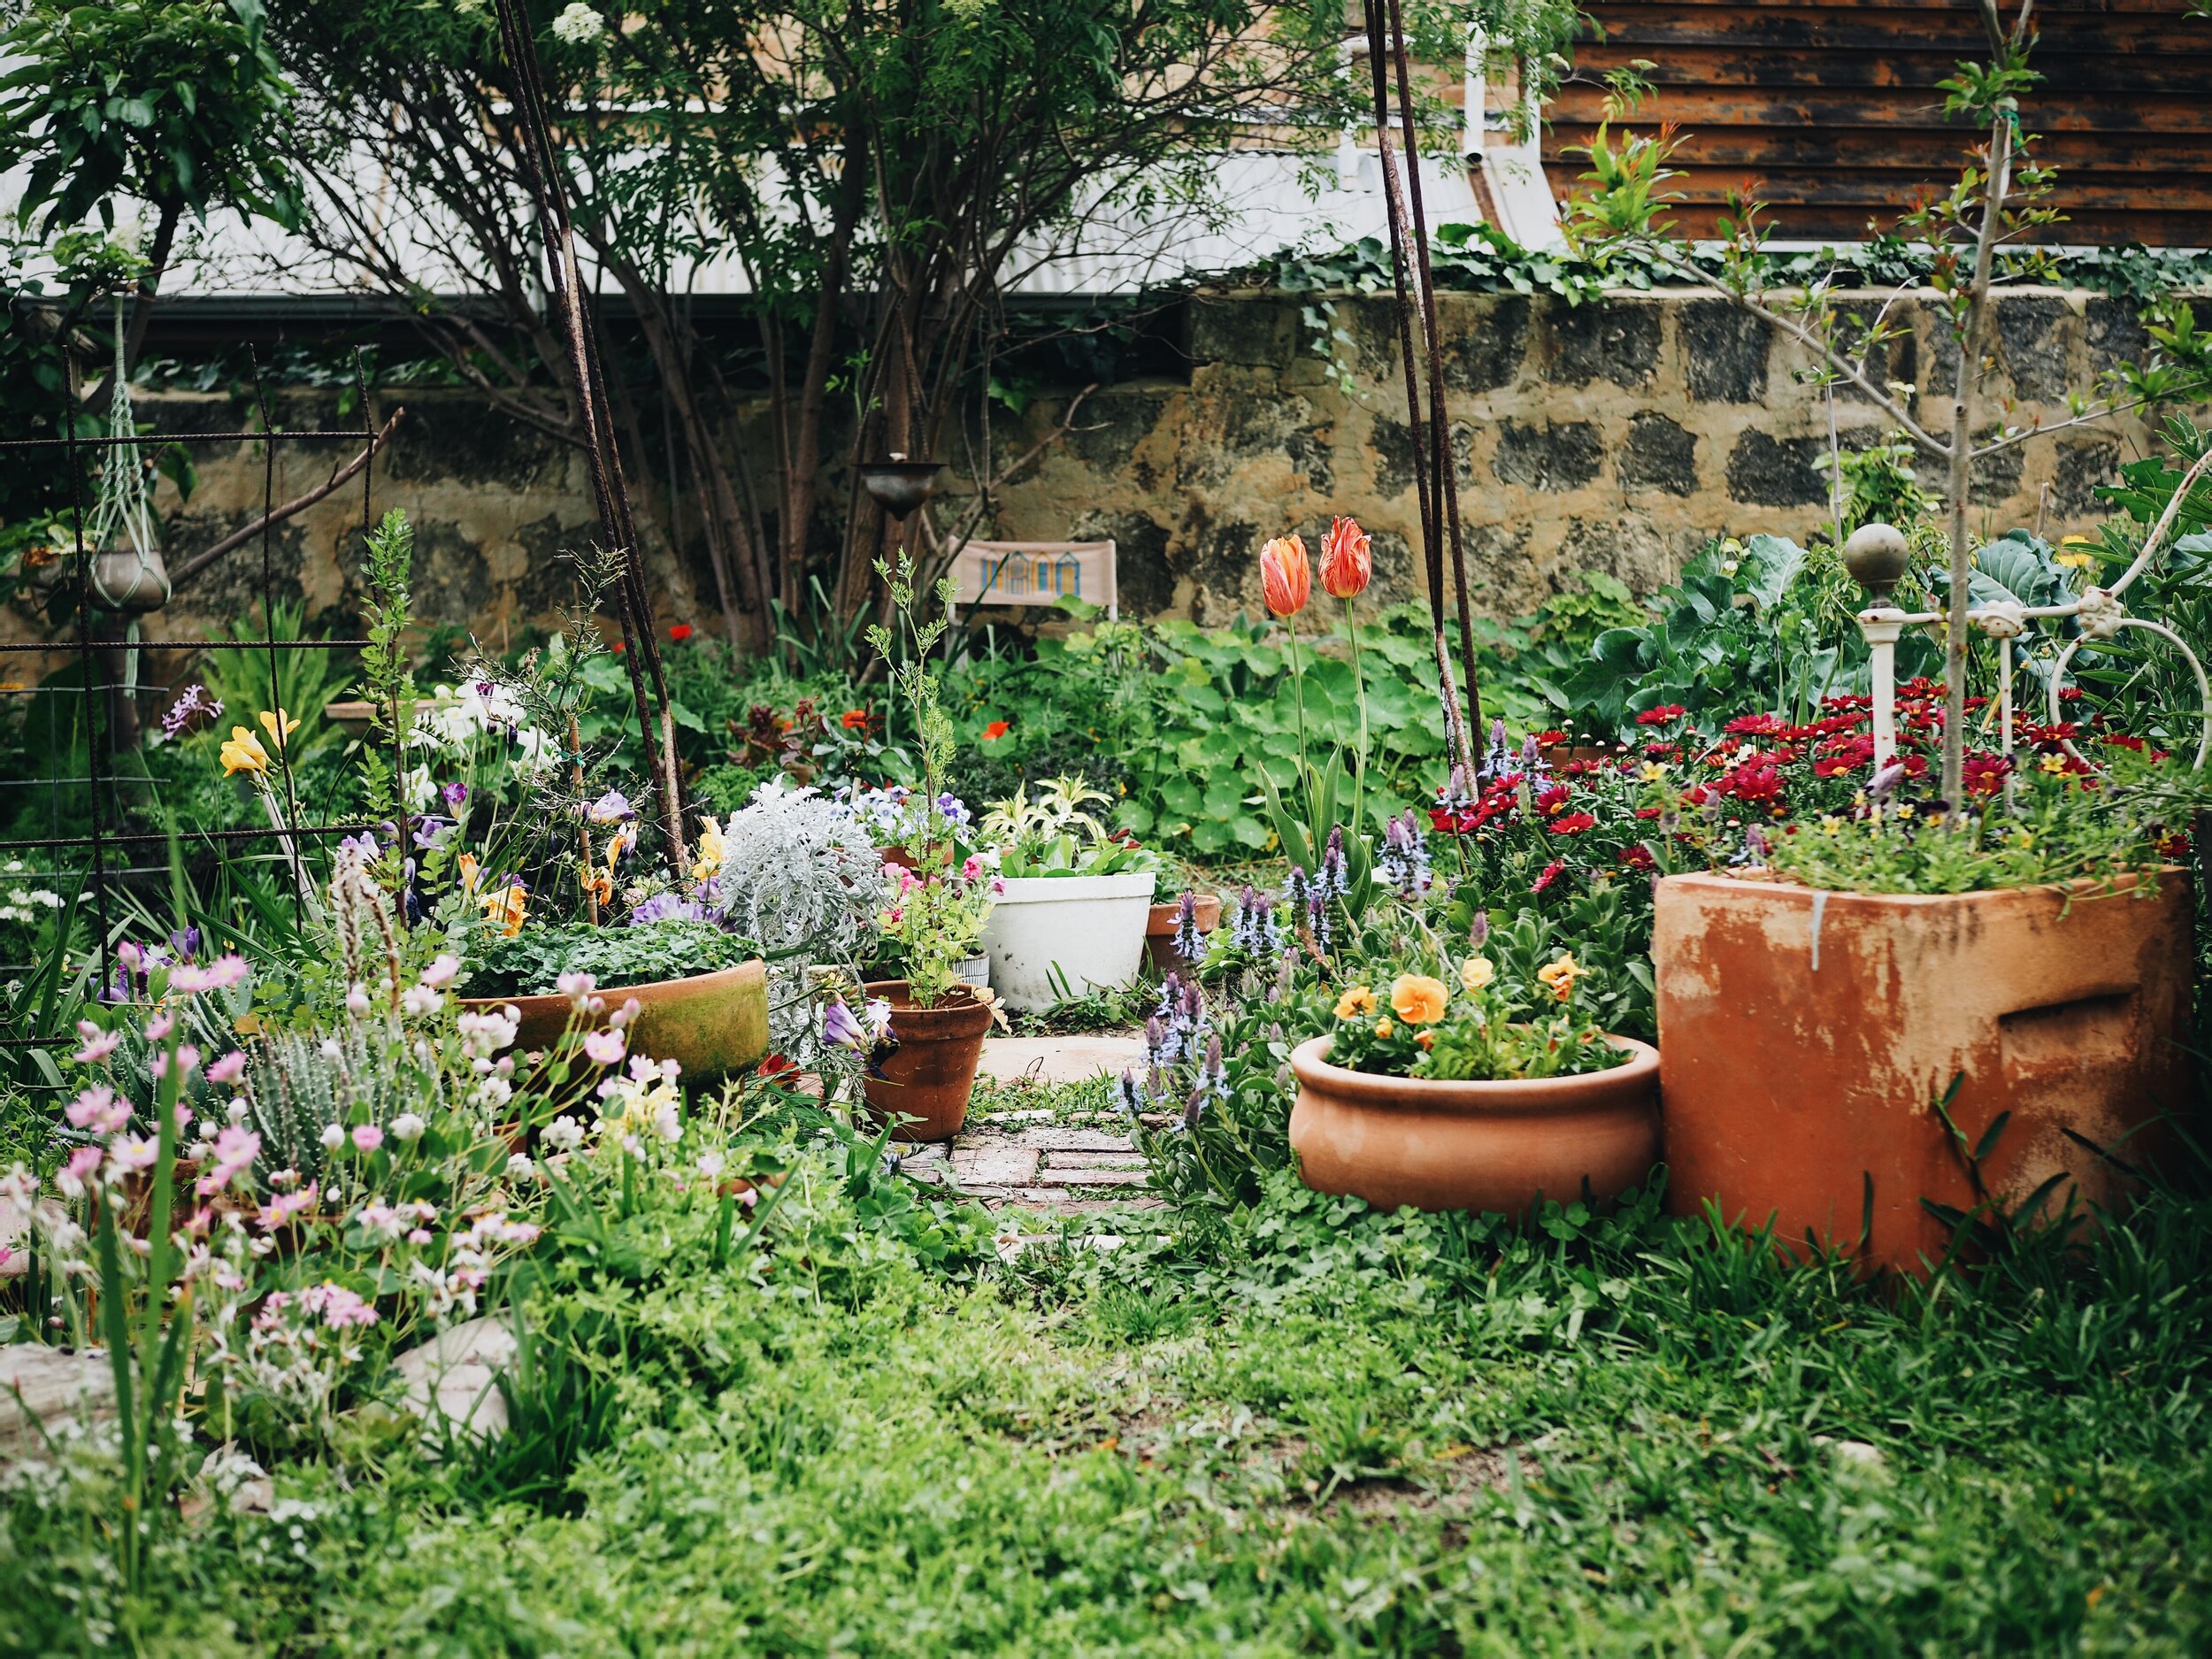 Image of Cottage garden with flowers, vegetables, and herbs